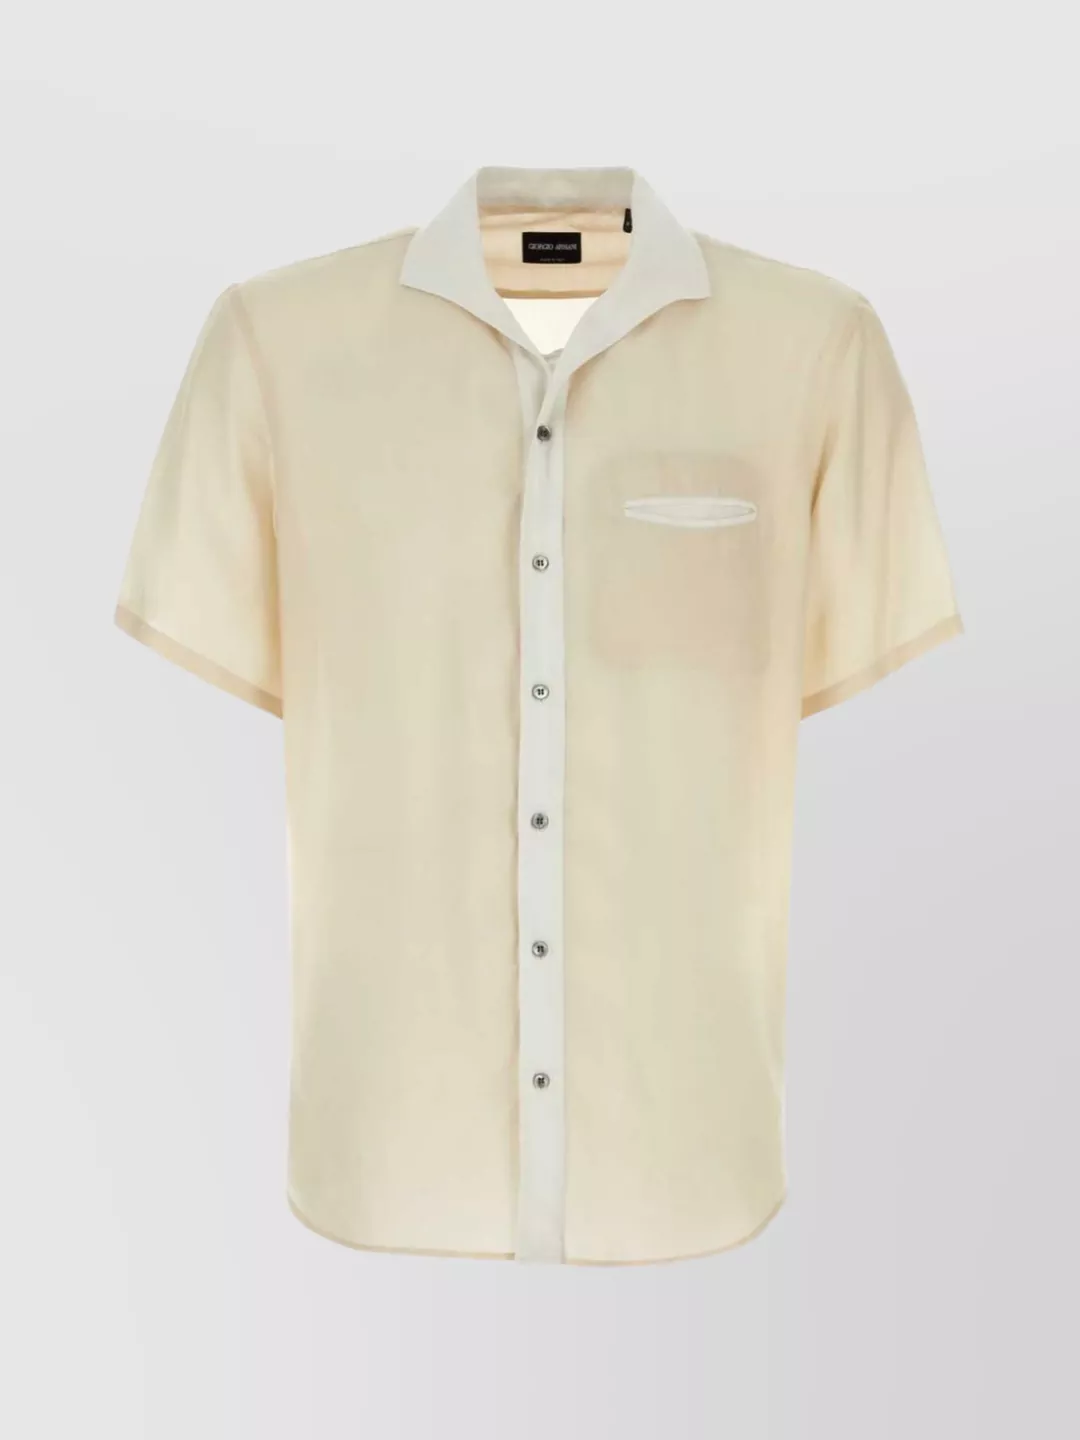 Giorgio Armani Lyocell Shirt Featuring Chest Pocket And Short Sleeves In Neutrals